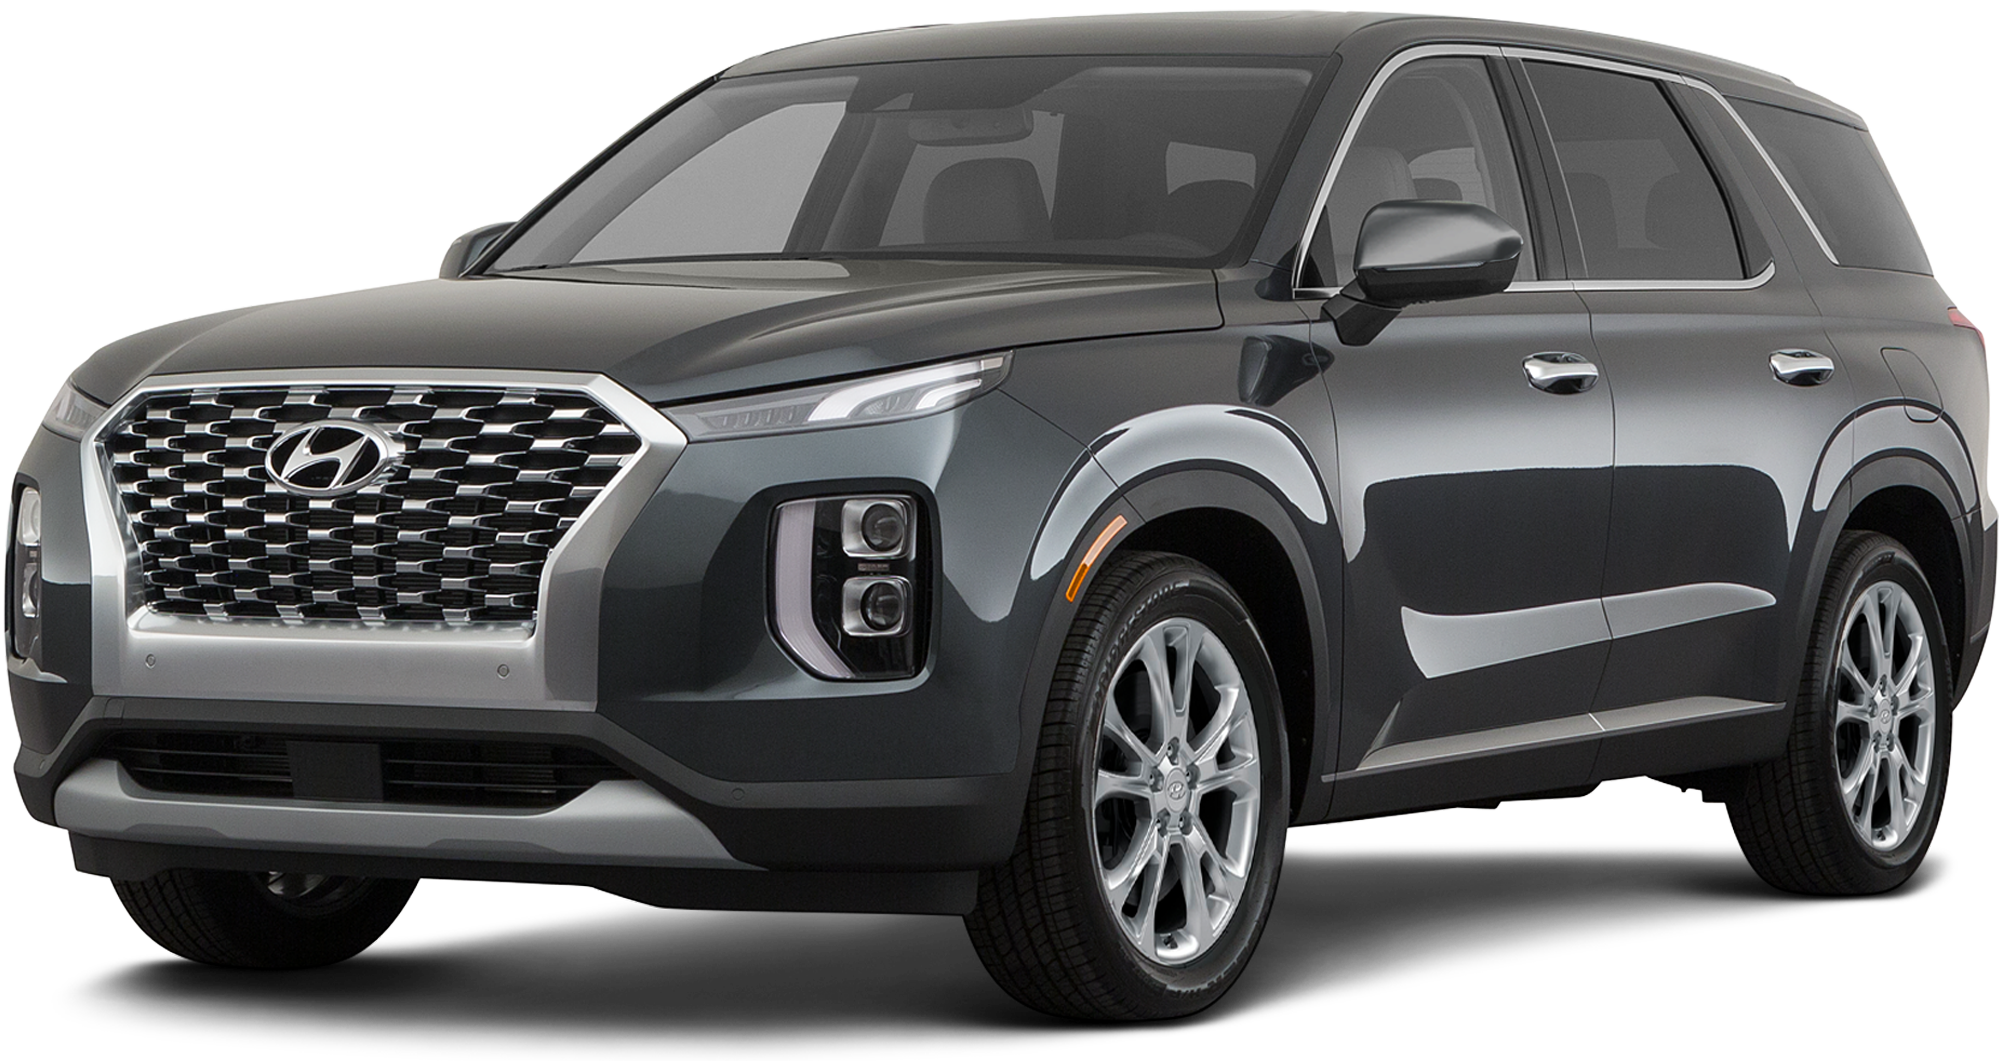 2021 Hyundai Palisade Incentives, Specials & Offers in Wilkes-Barre PA